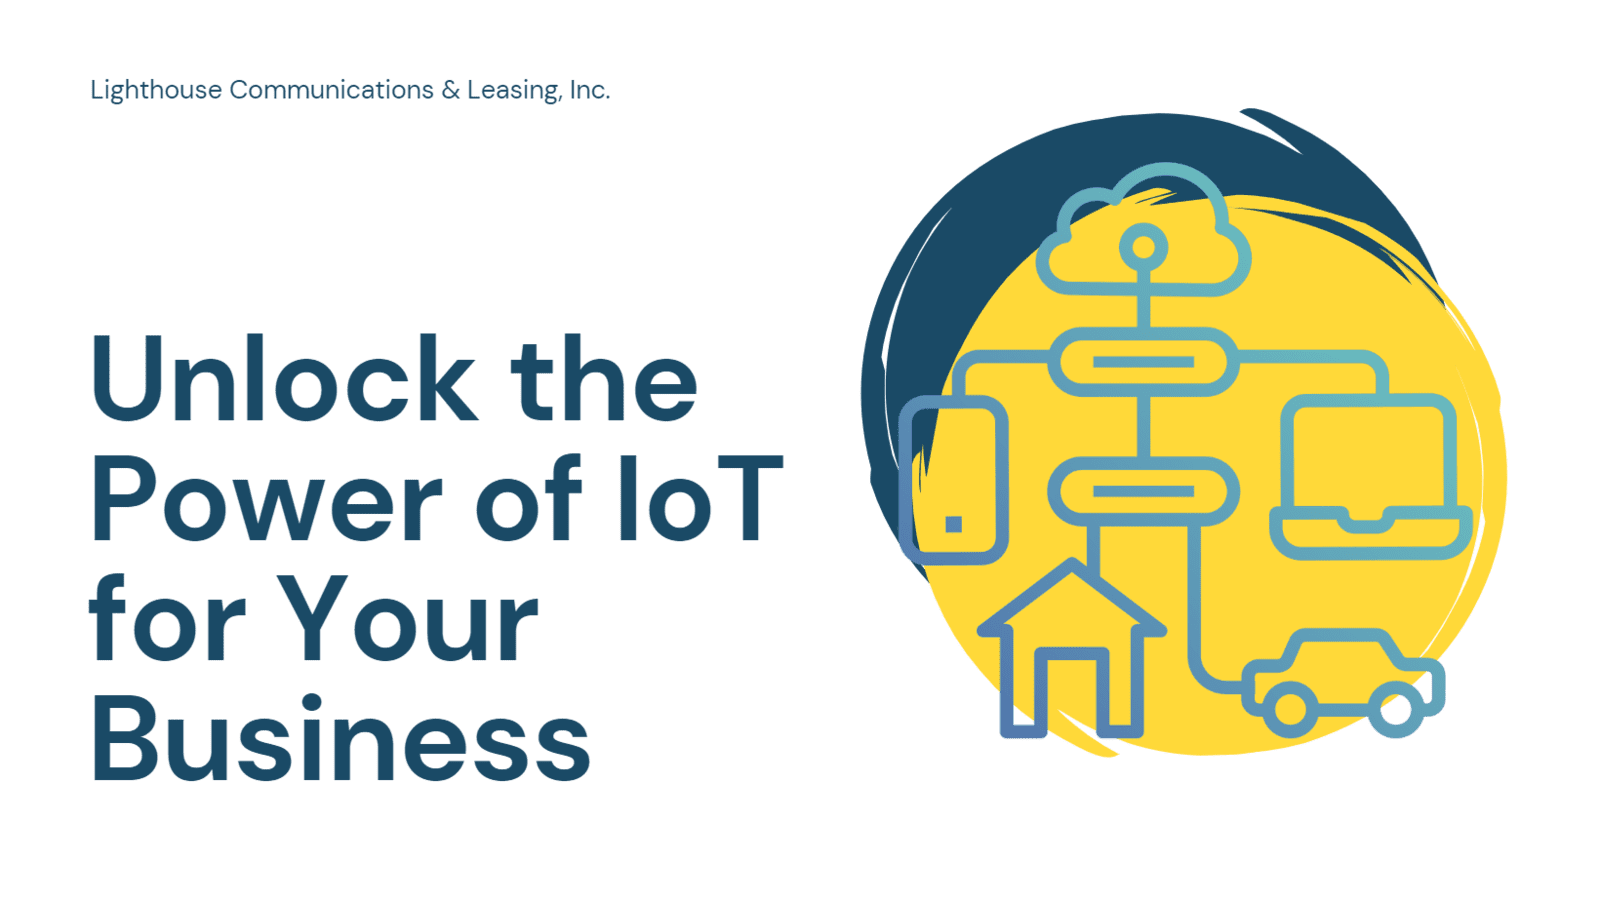 Unlock the Power of IoT for Your Business